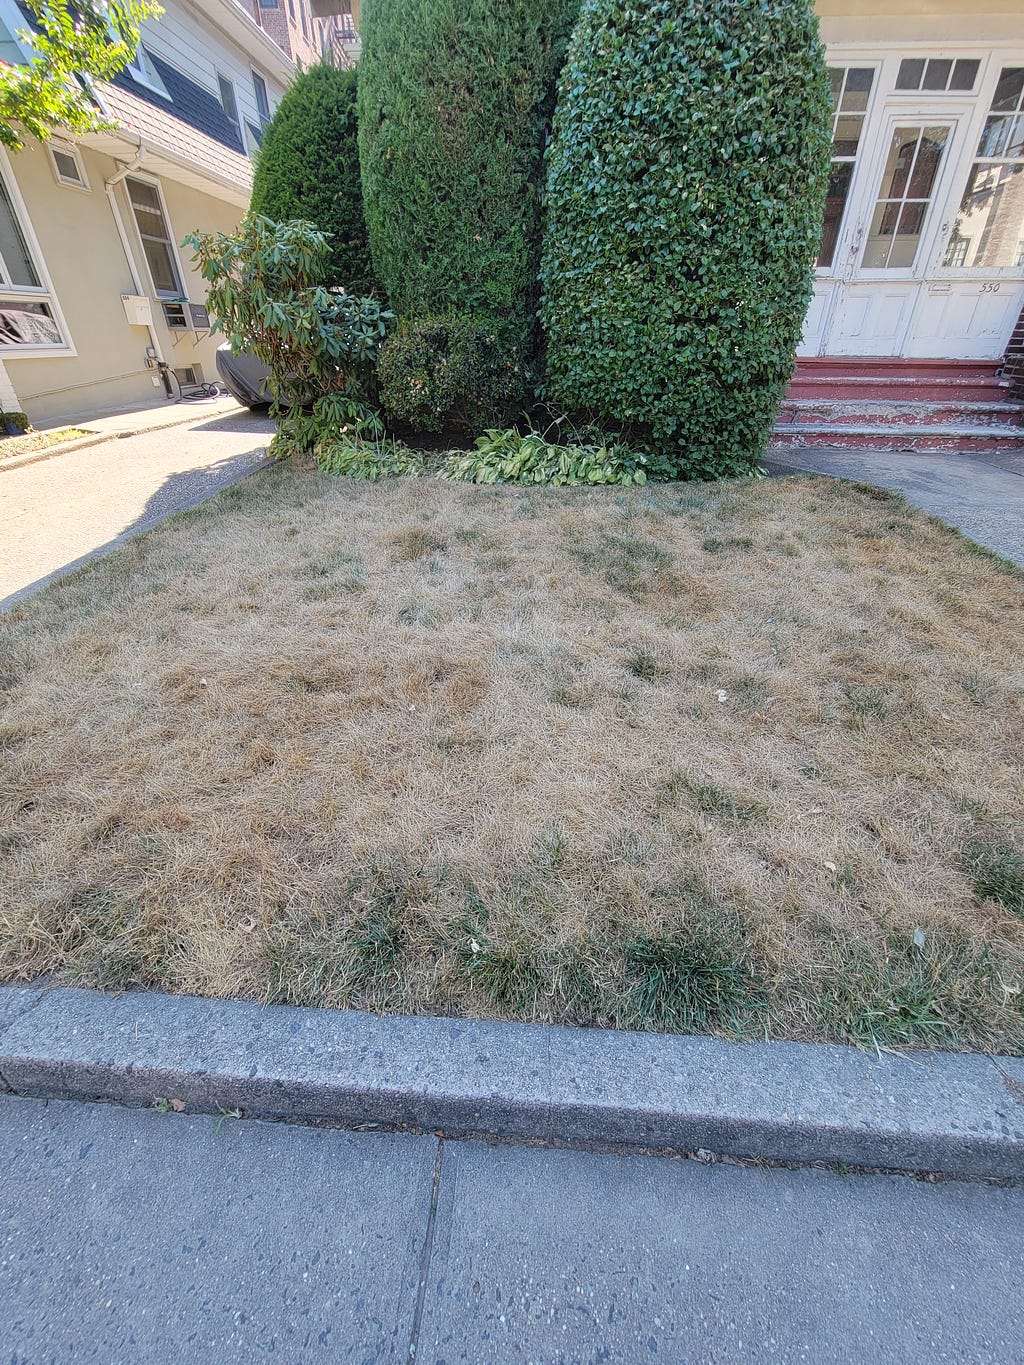 A front lawn, the grass of which is dried and brown.